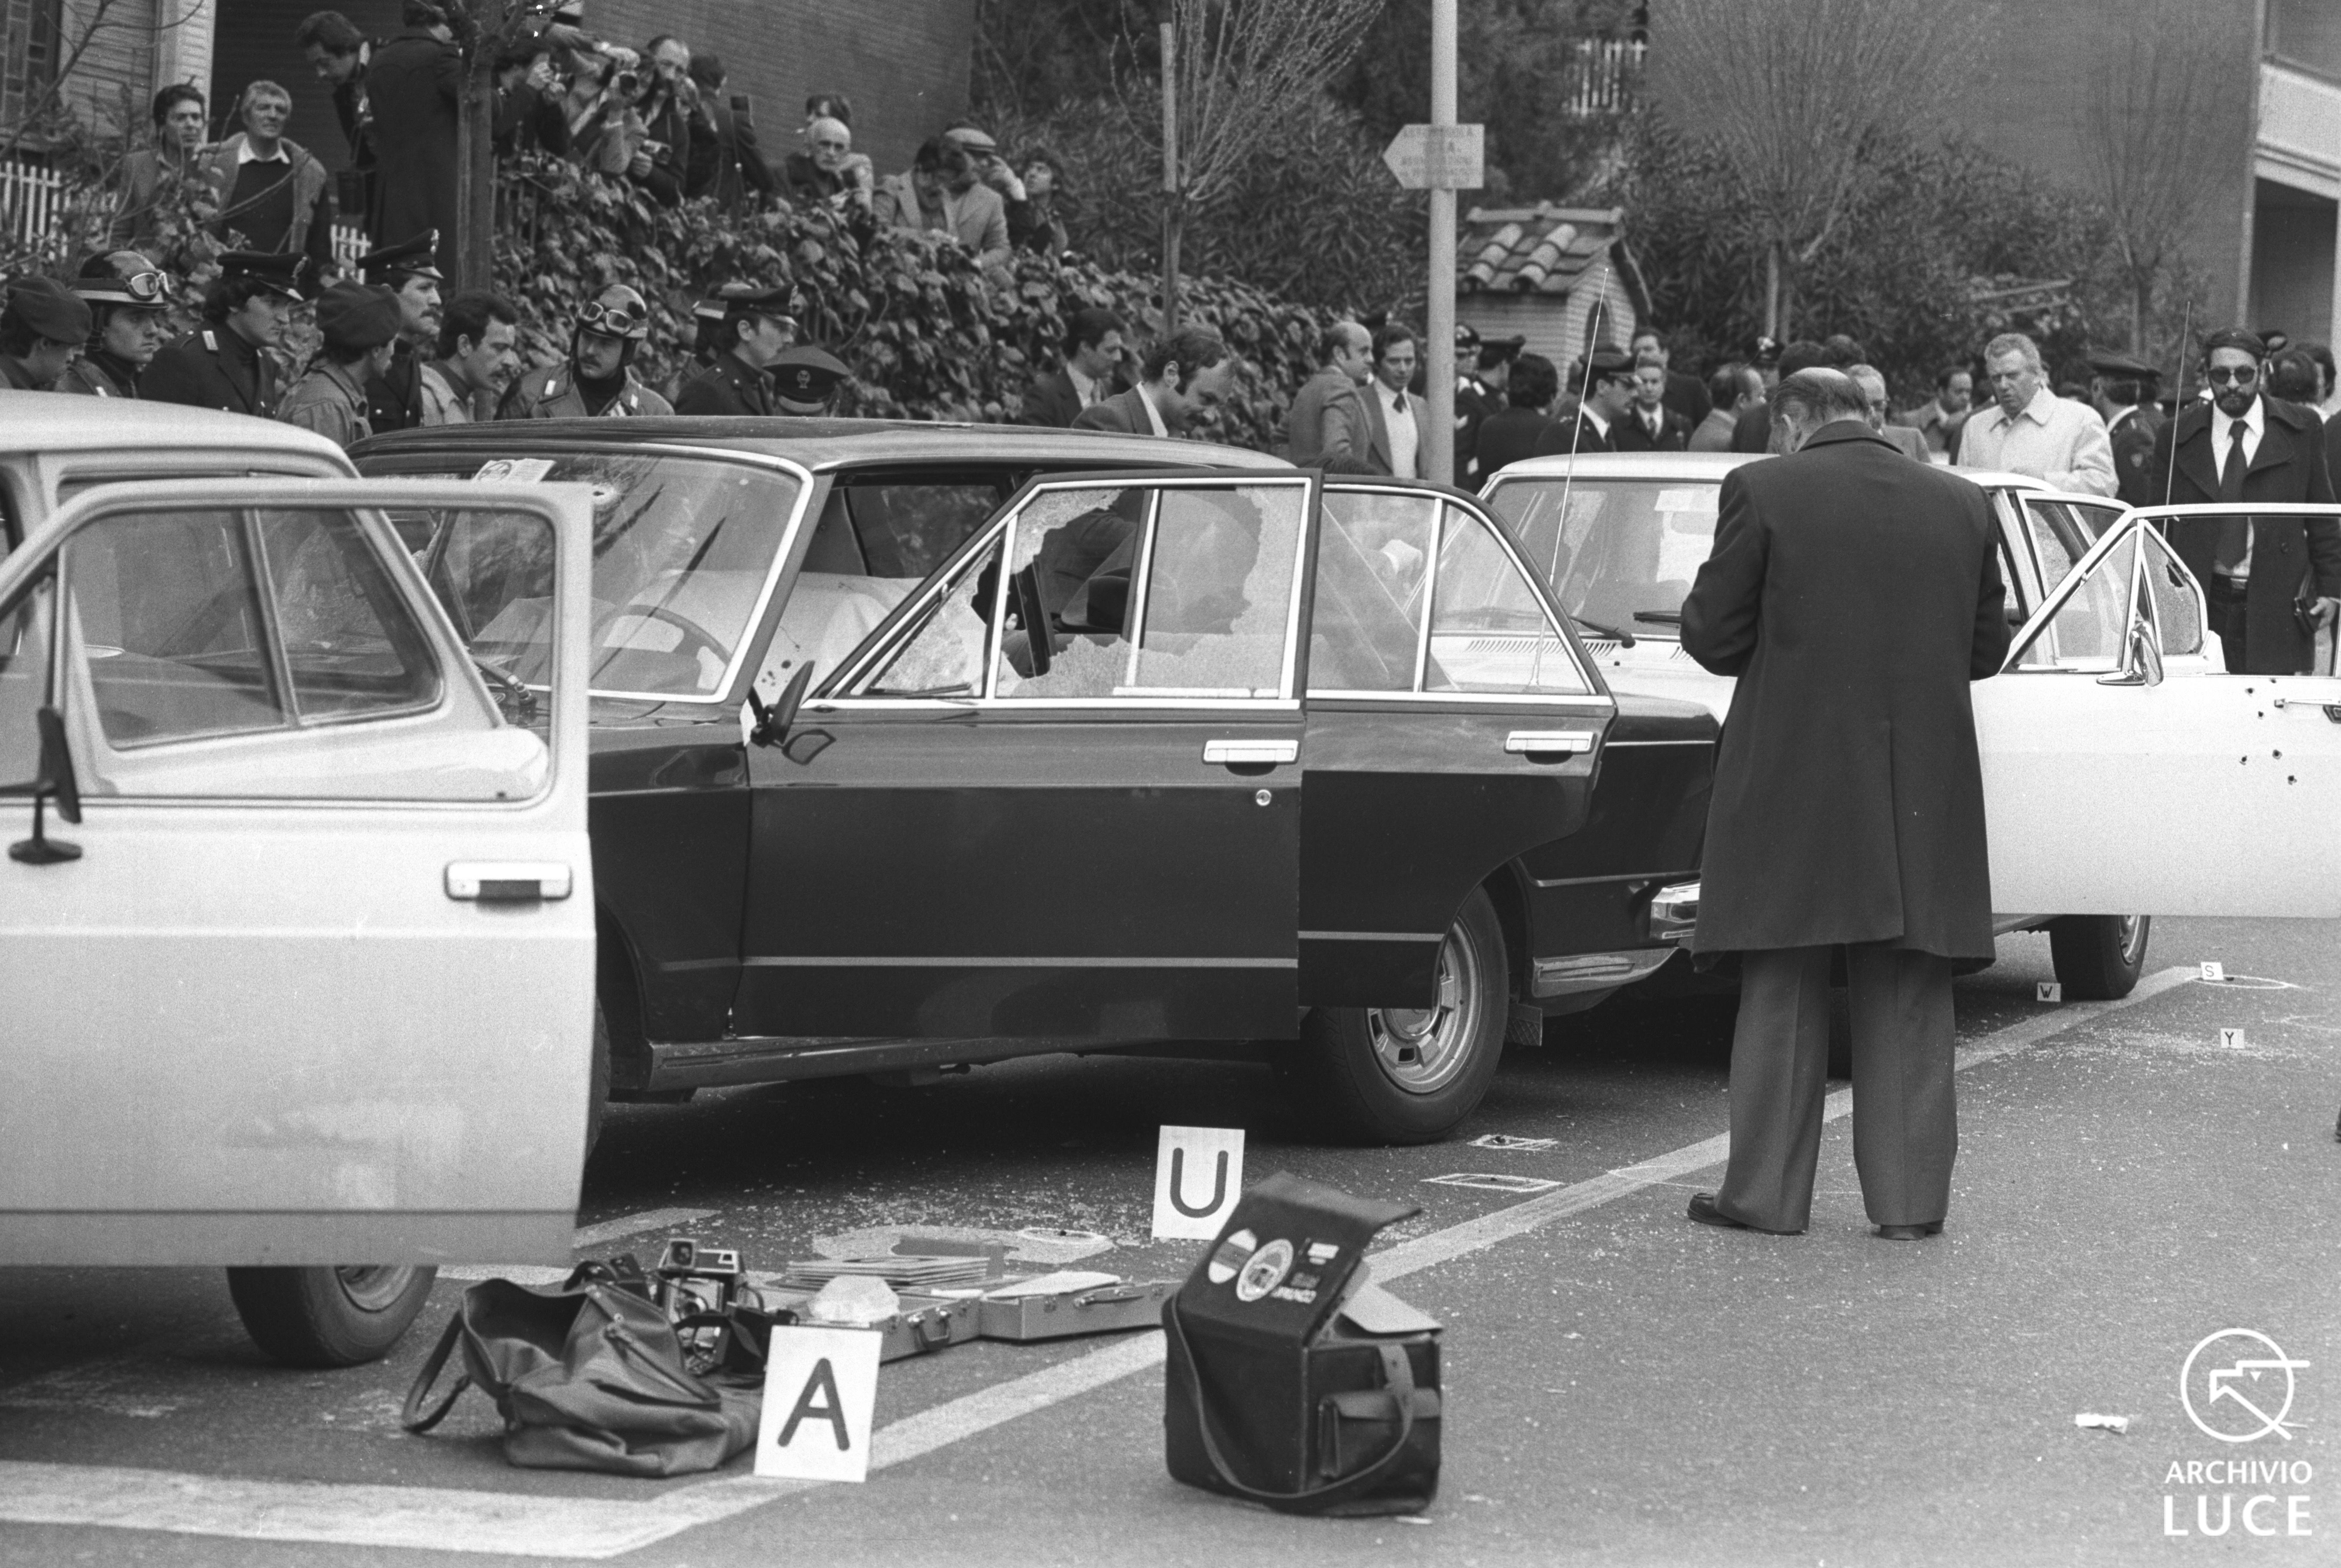 black and white photo of several parked cars, their doors open, their windows smashed and drivers' side doors riddled with bullet holes. A detective stands by to inspect the scene, while onlookers gather in the background.